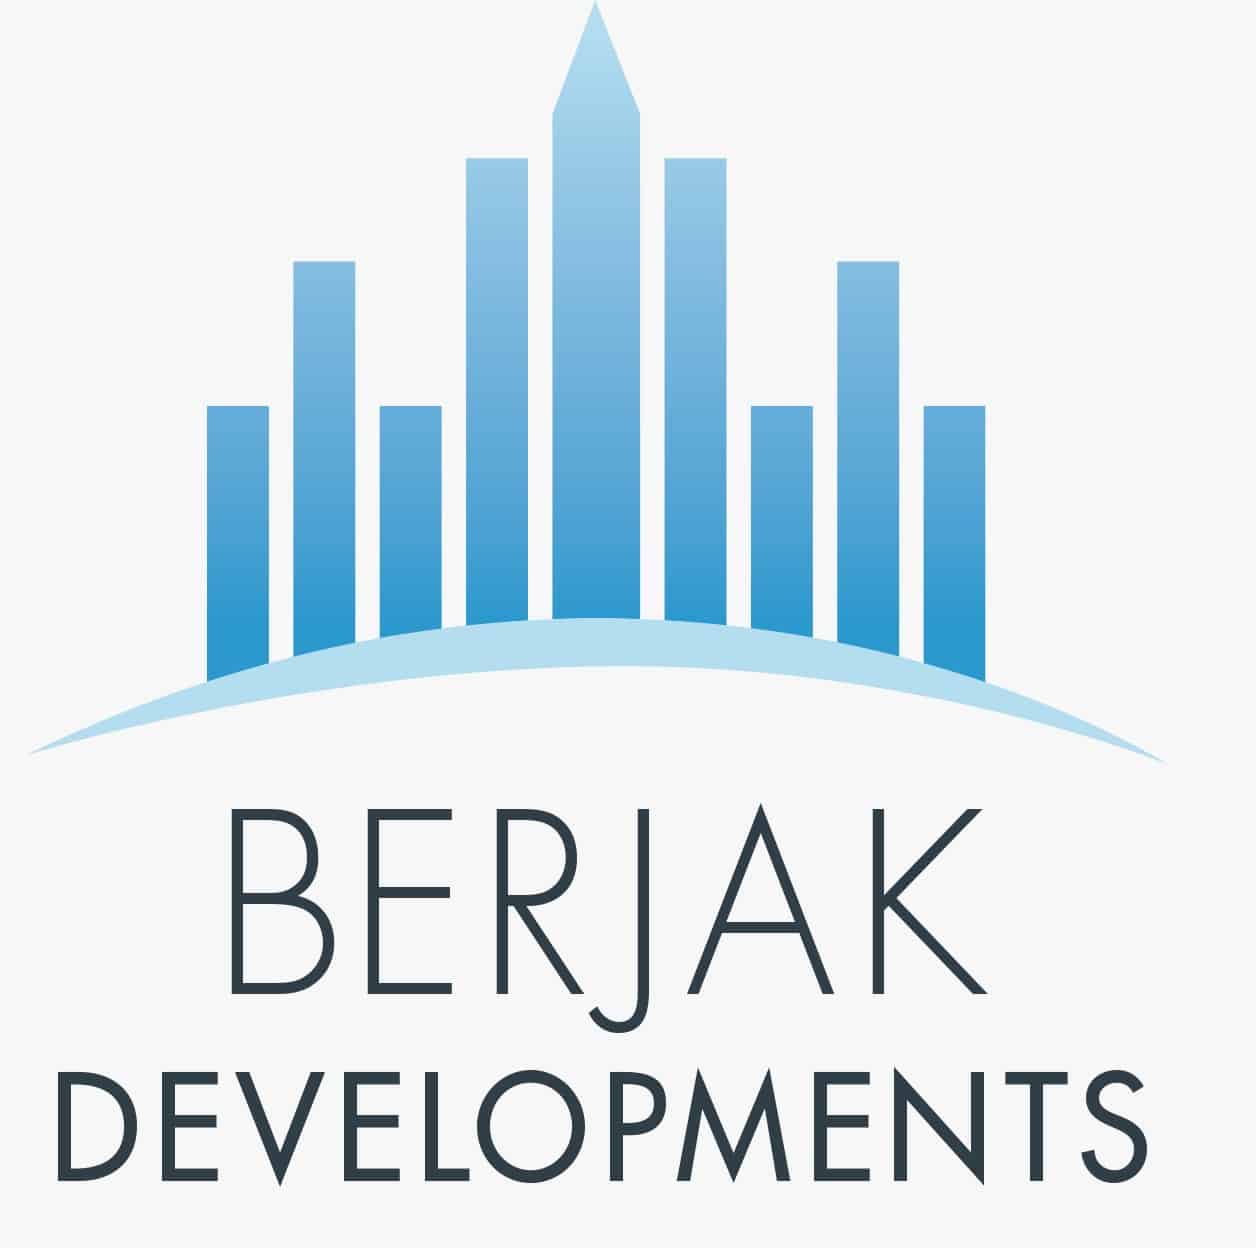 BERJAK DEVELOPS Is An Innovation-driven Concrete Company Serving Edmonton And All Surrounding Re ...